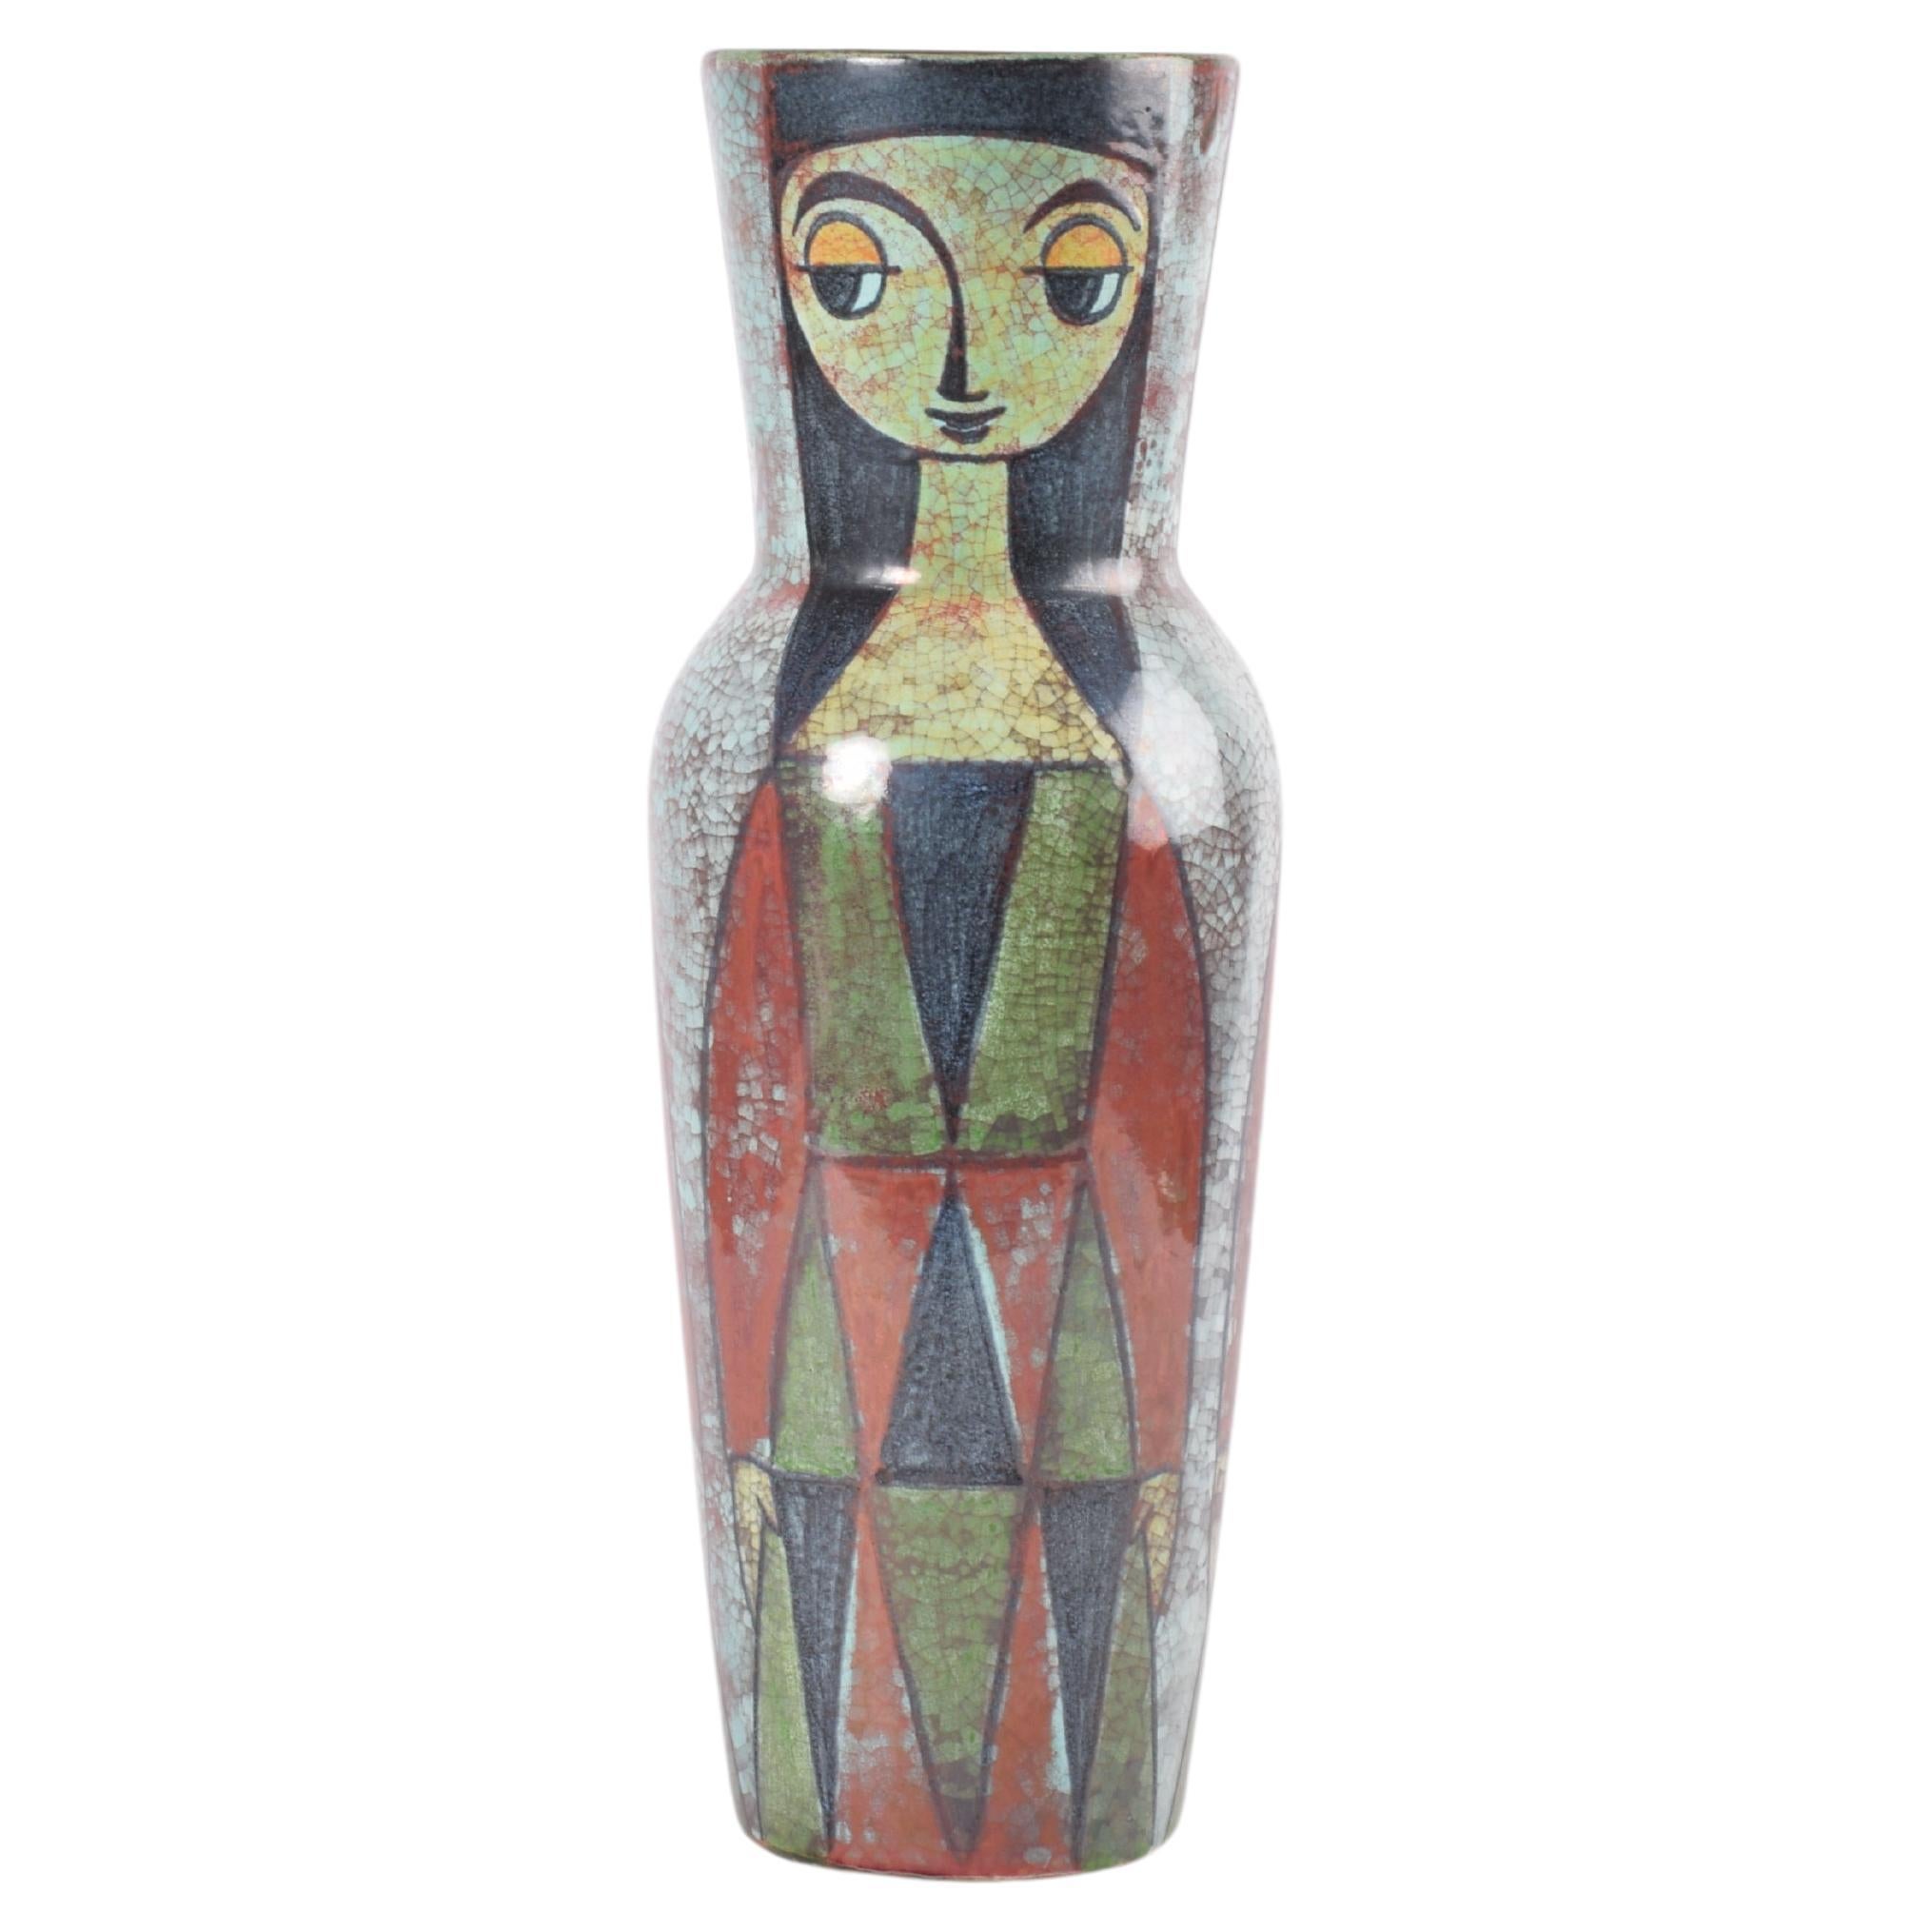 Tall Vase by Marianne Starck for MA&S Persia Glaze Colorful Decor, Danish 1960s For Sale